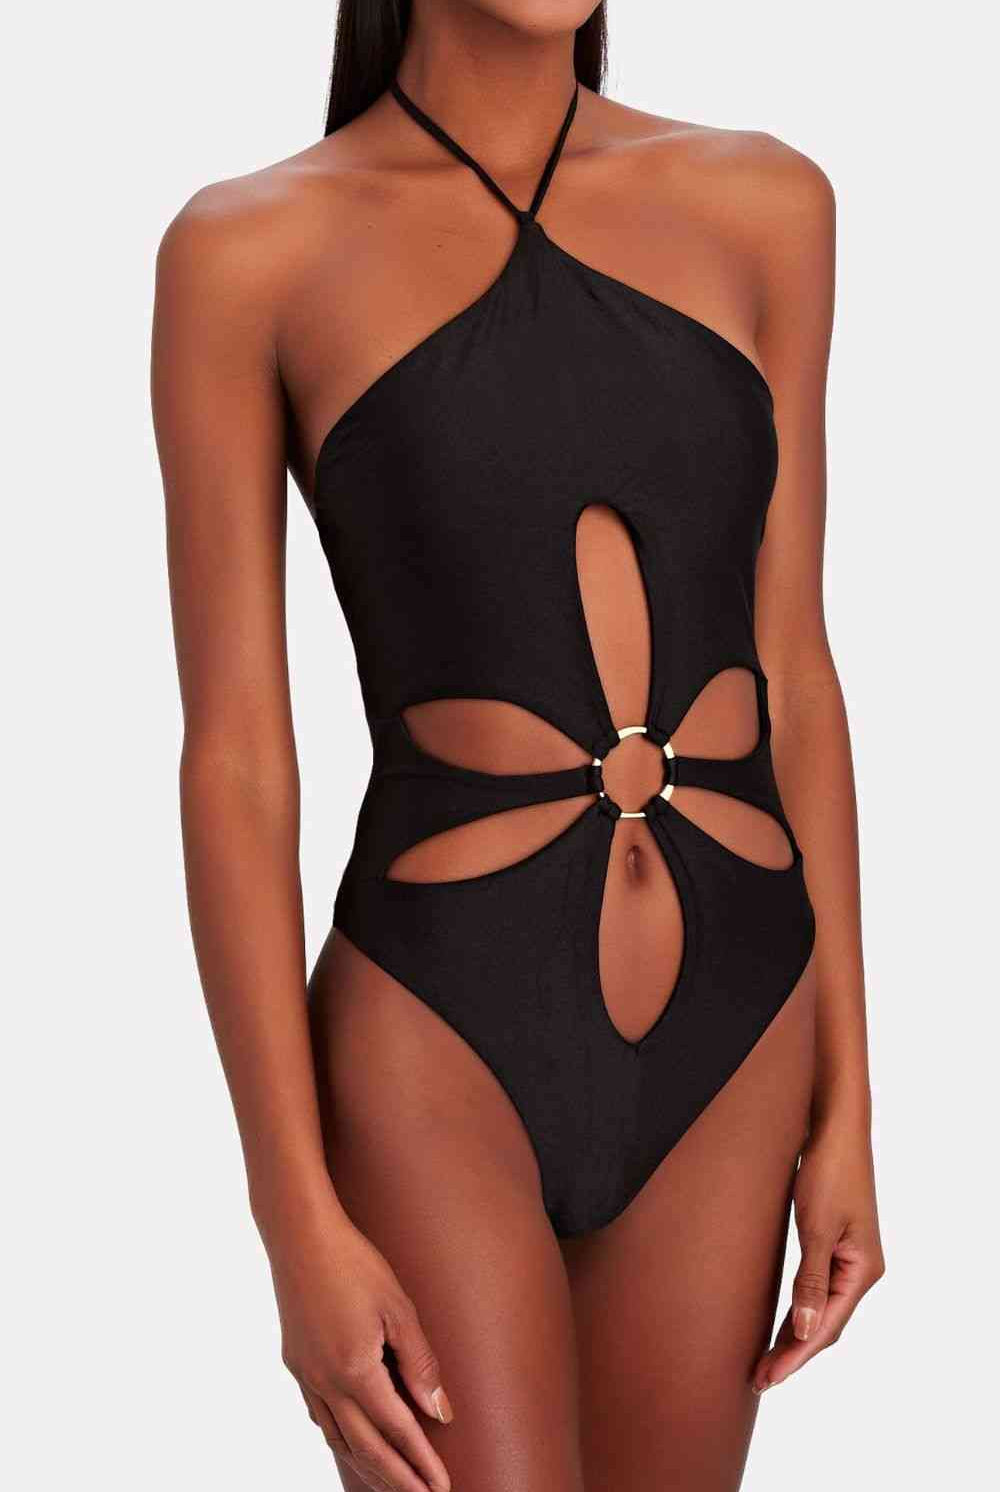  Olive green, halter neck one-piece swimsuit with floral cut-out details around the waist and chest, worn by a model posing in a tropical jungle setting.